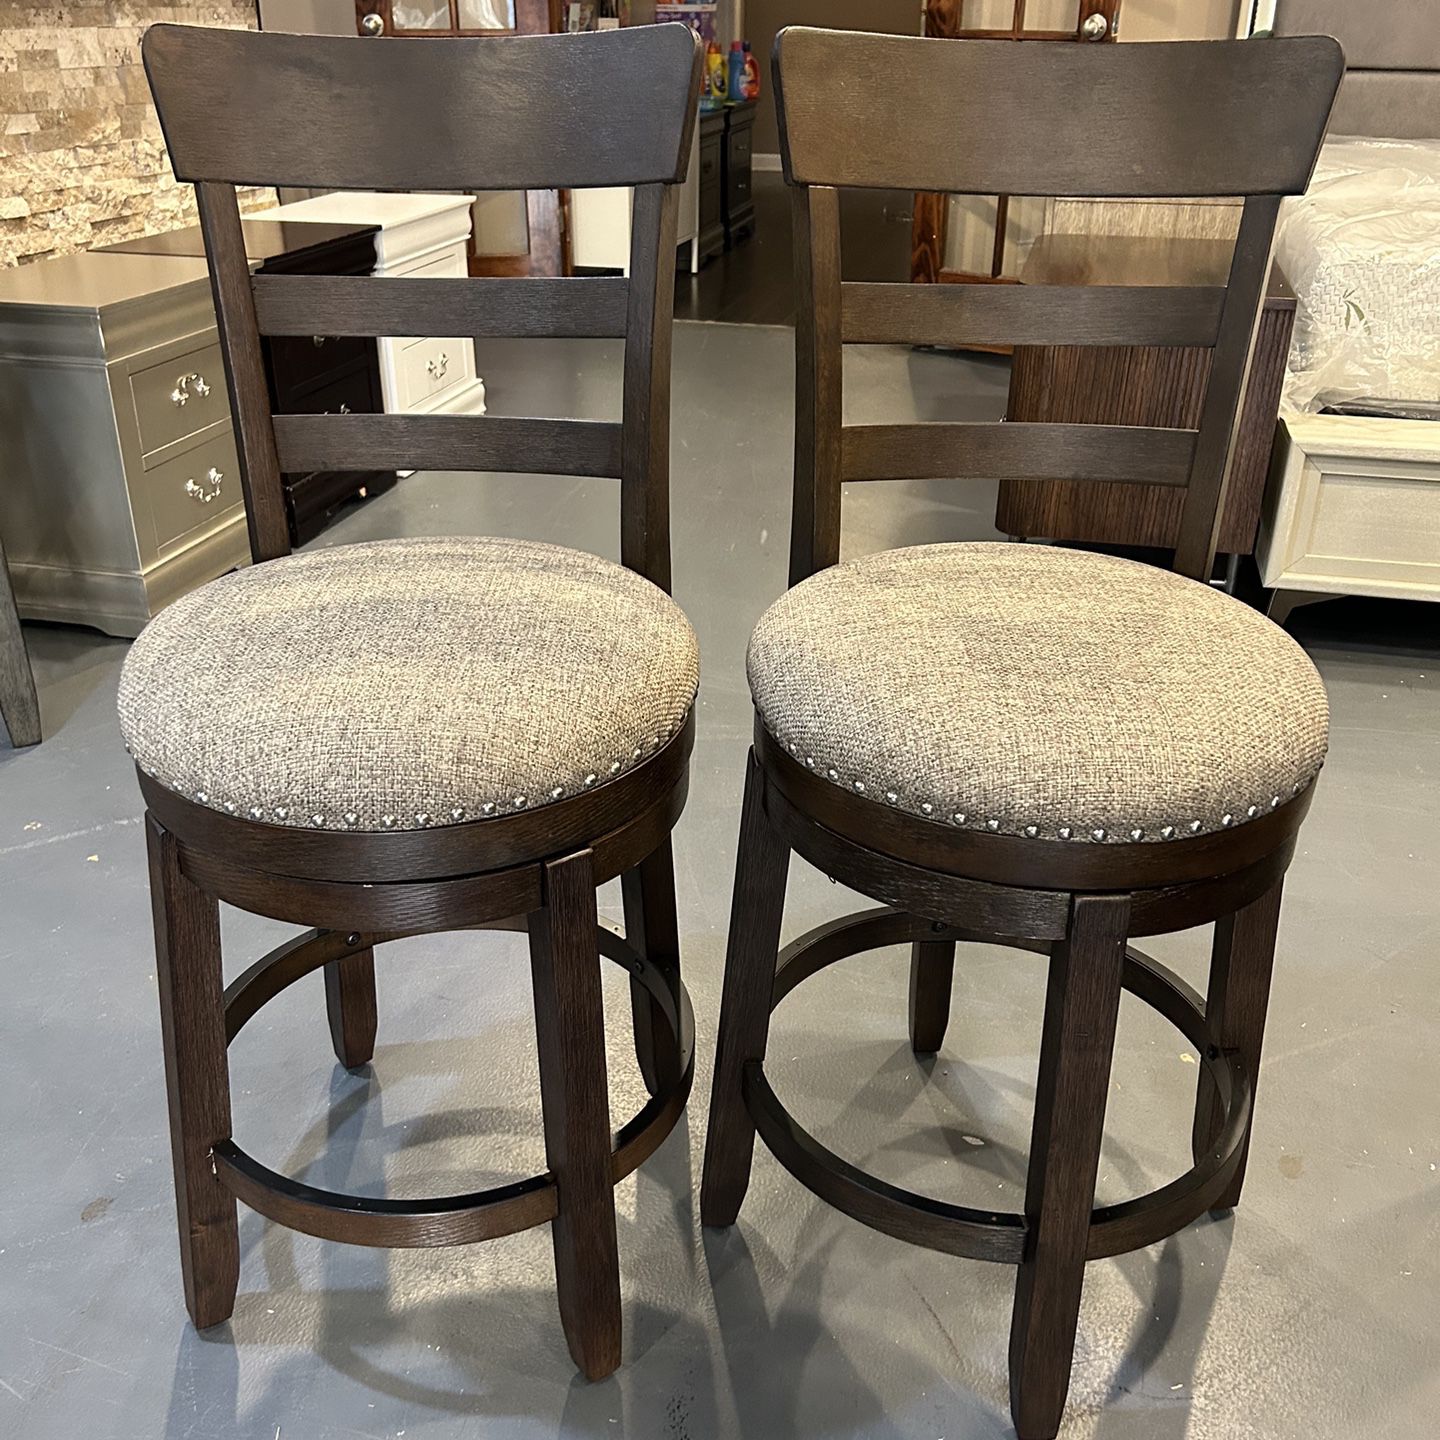 New Counter Height Stool Set (2) 